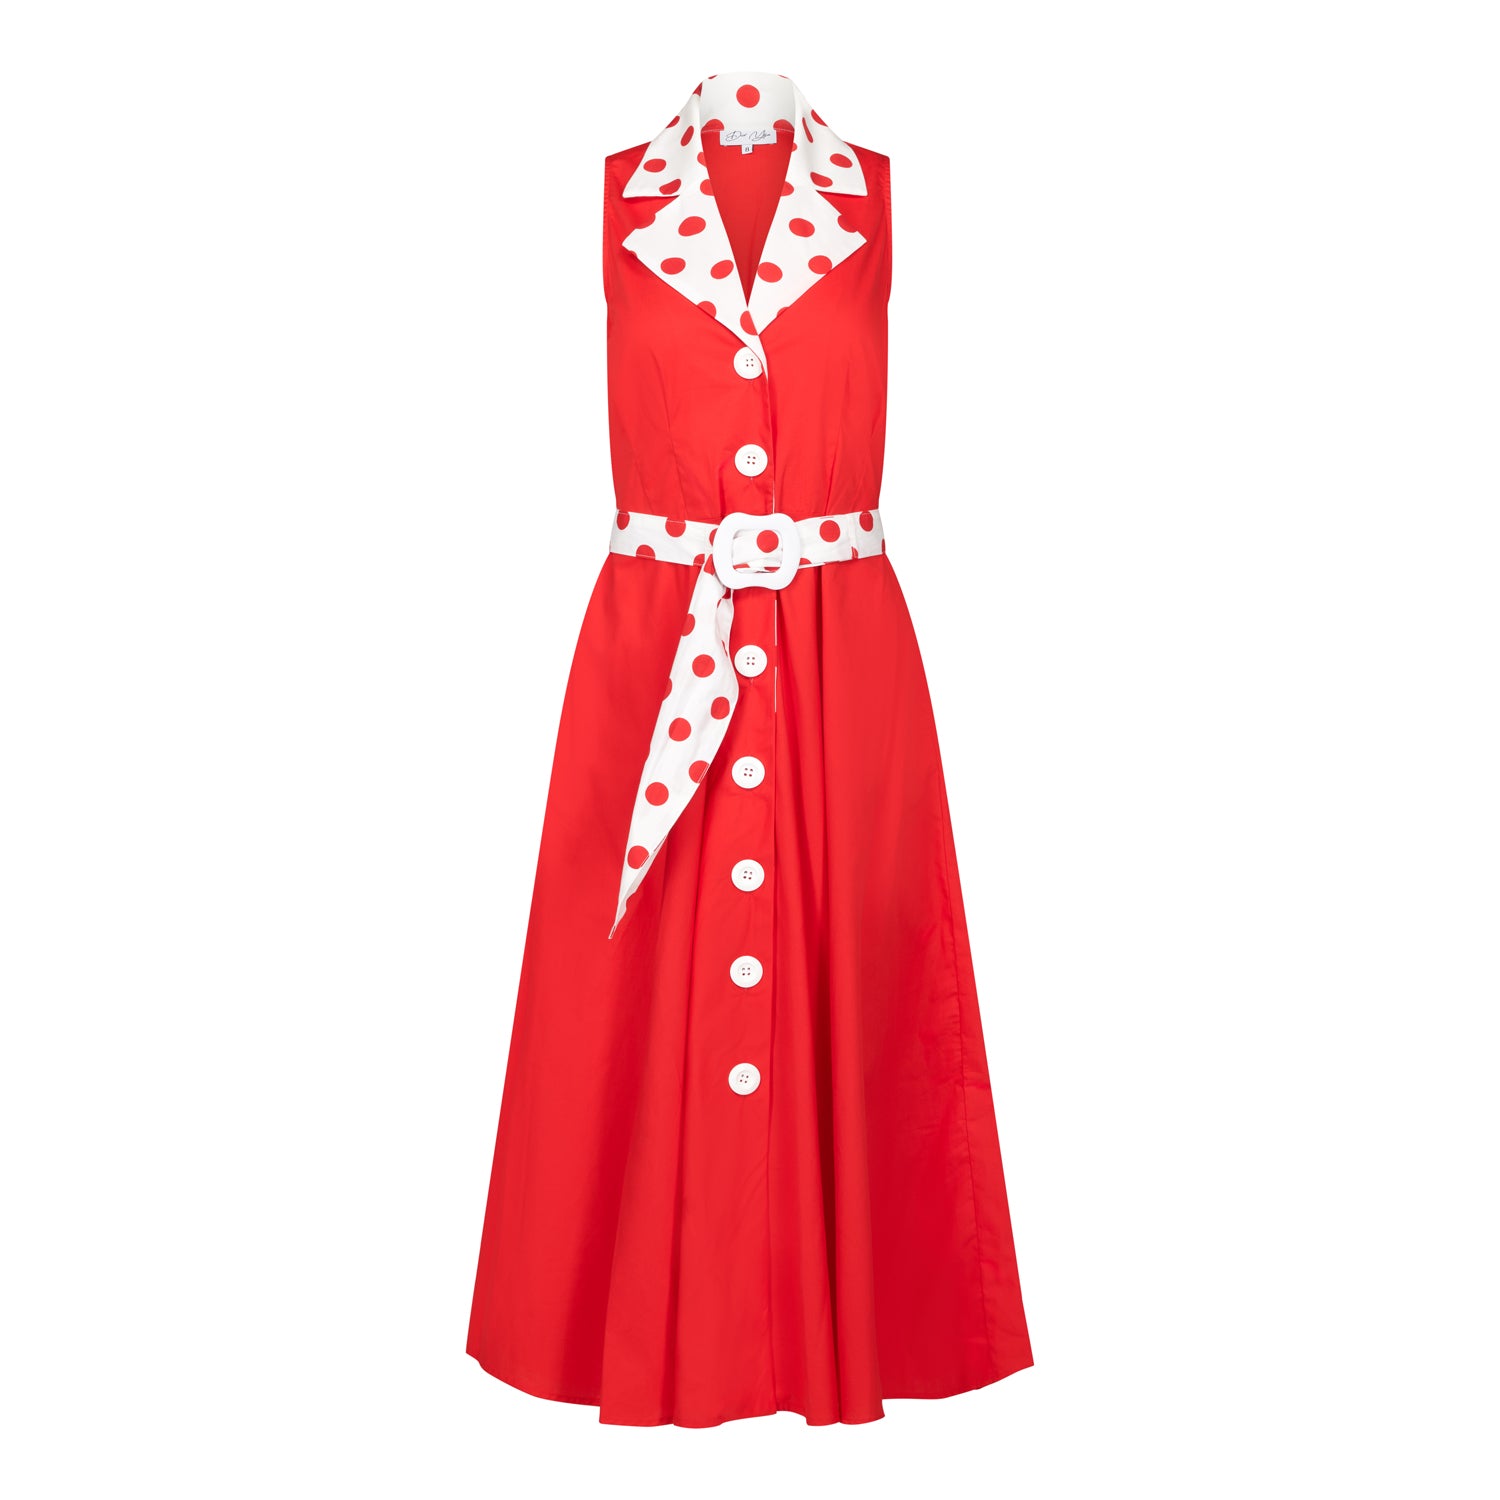 Ghost image, front view of red fit and flare polka dot midi dress.  Collar and belt is white with red polka dots and main dress is all red with white buttons on centre front. 